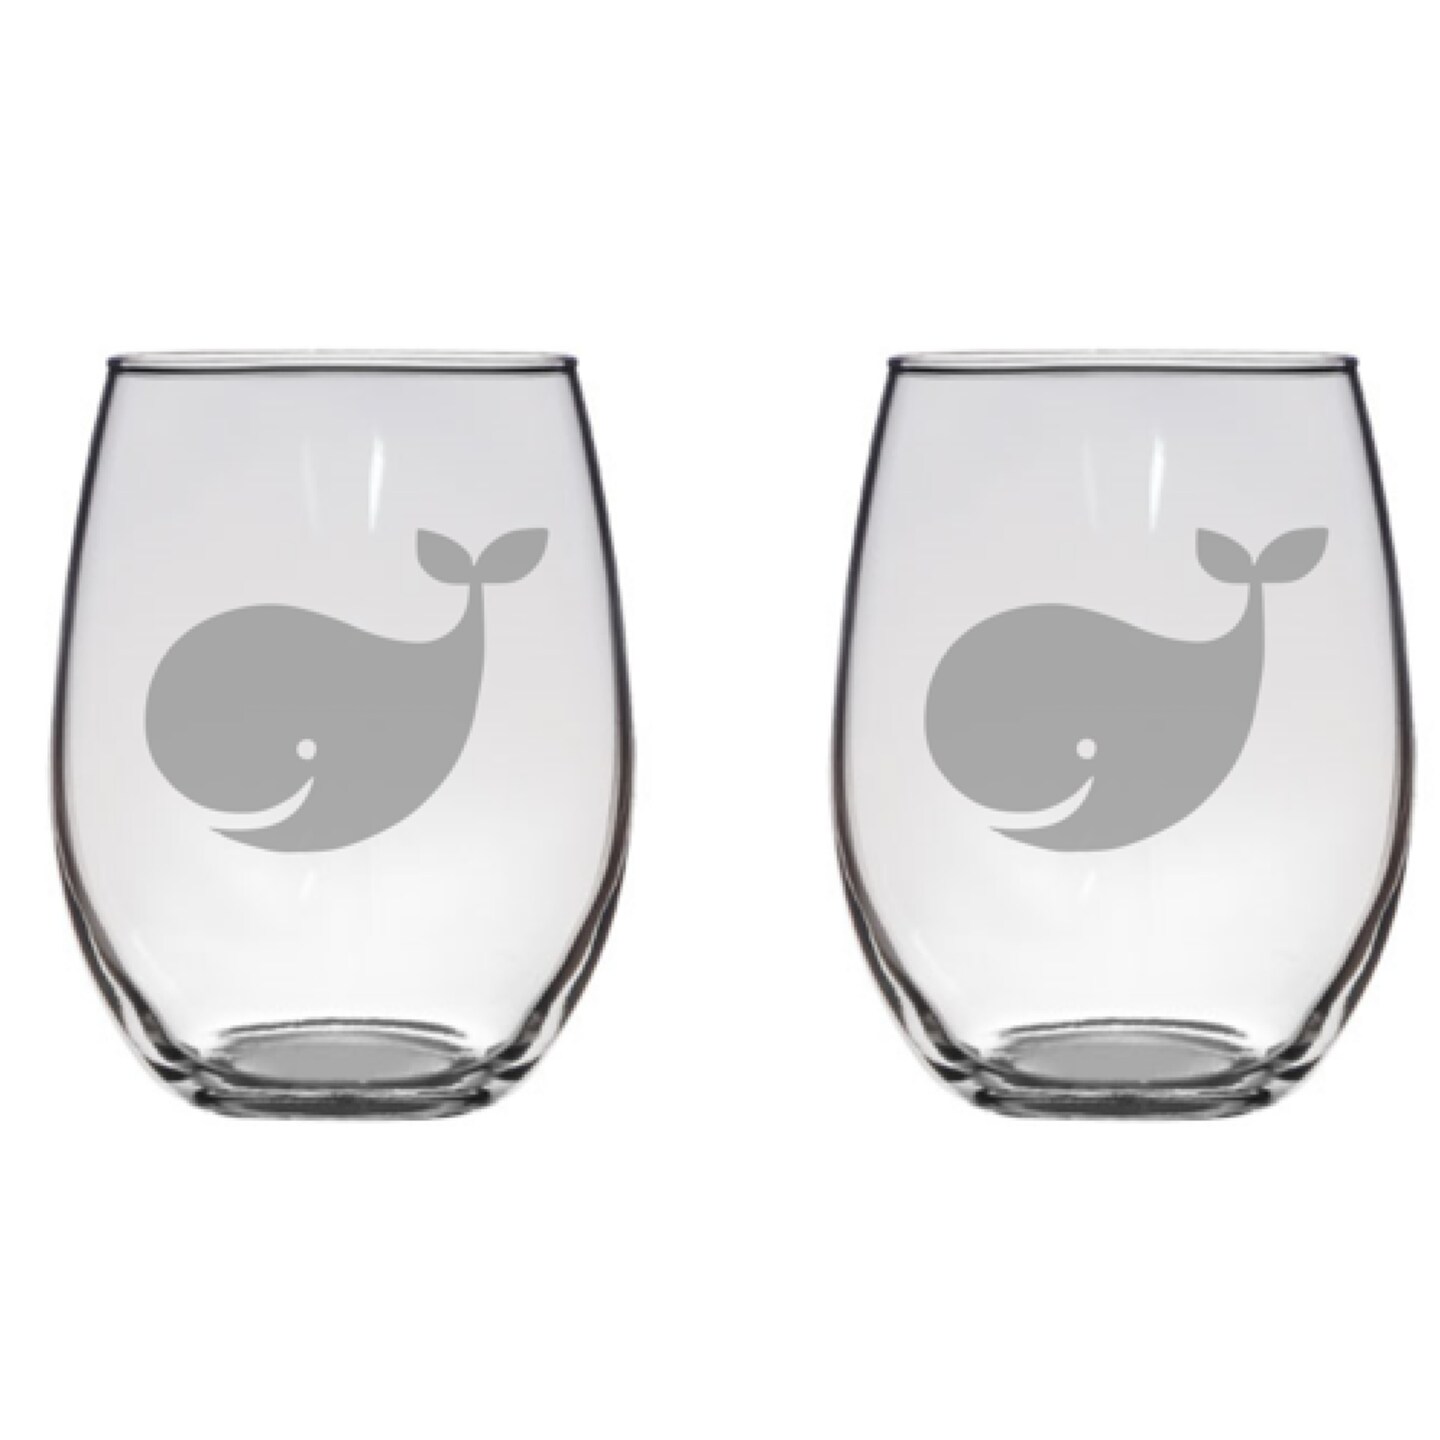 Cute Whale Etched Stemless Wine Glasses Free Personalization